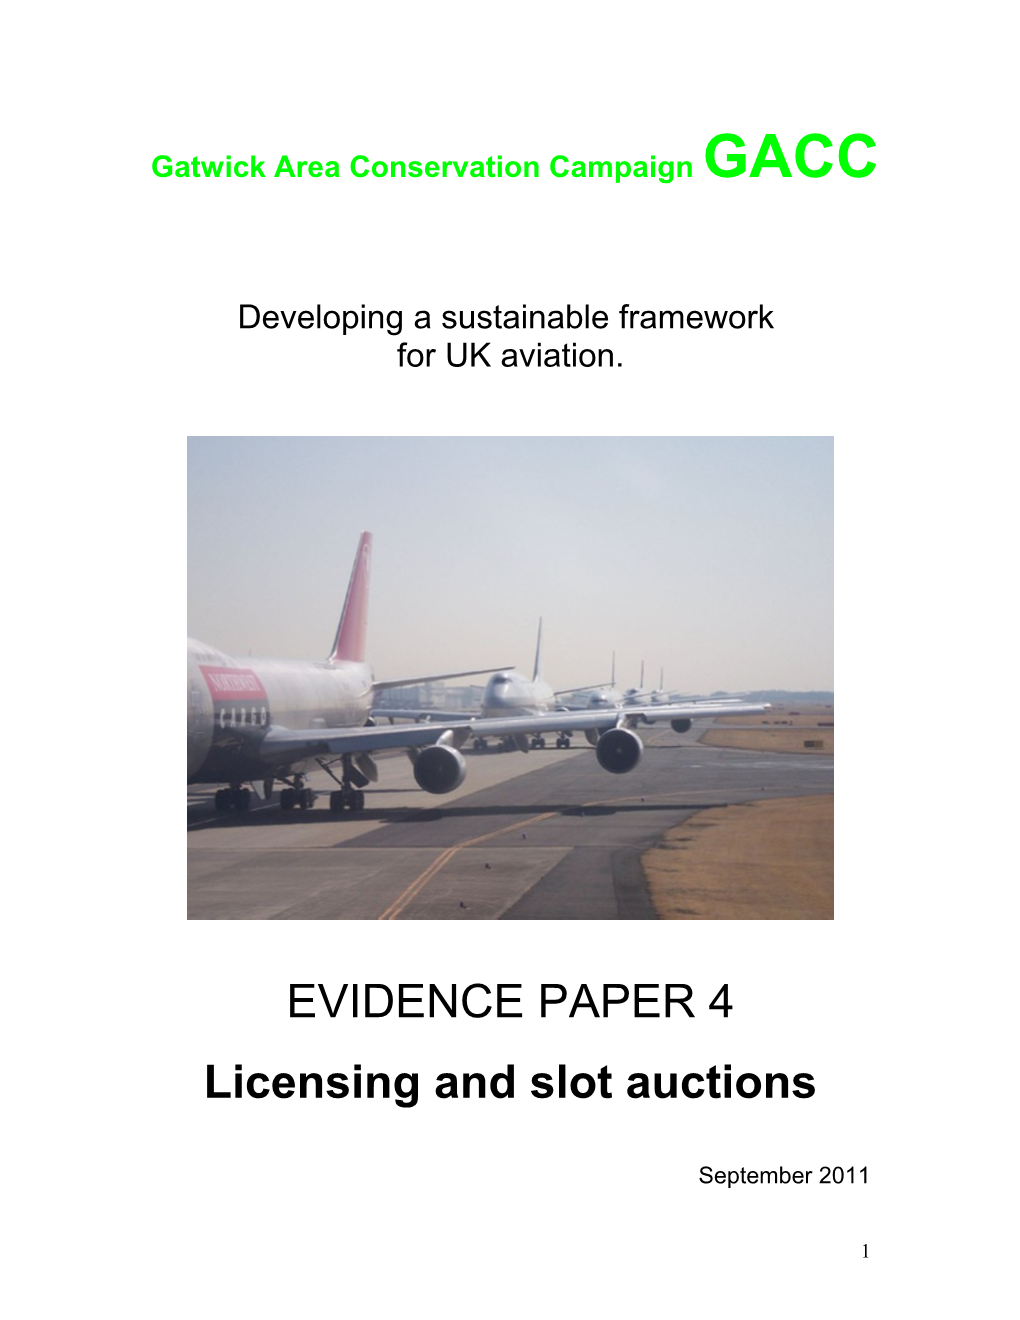 GACC Evidence Paper